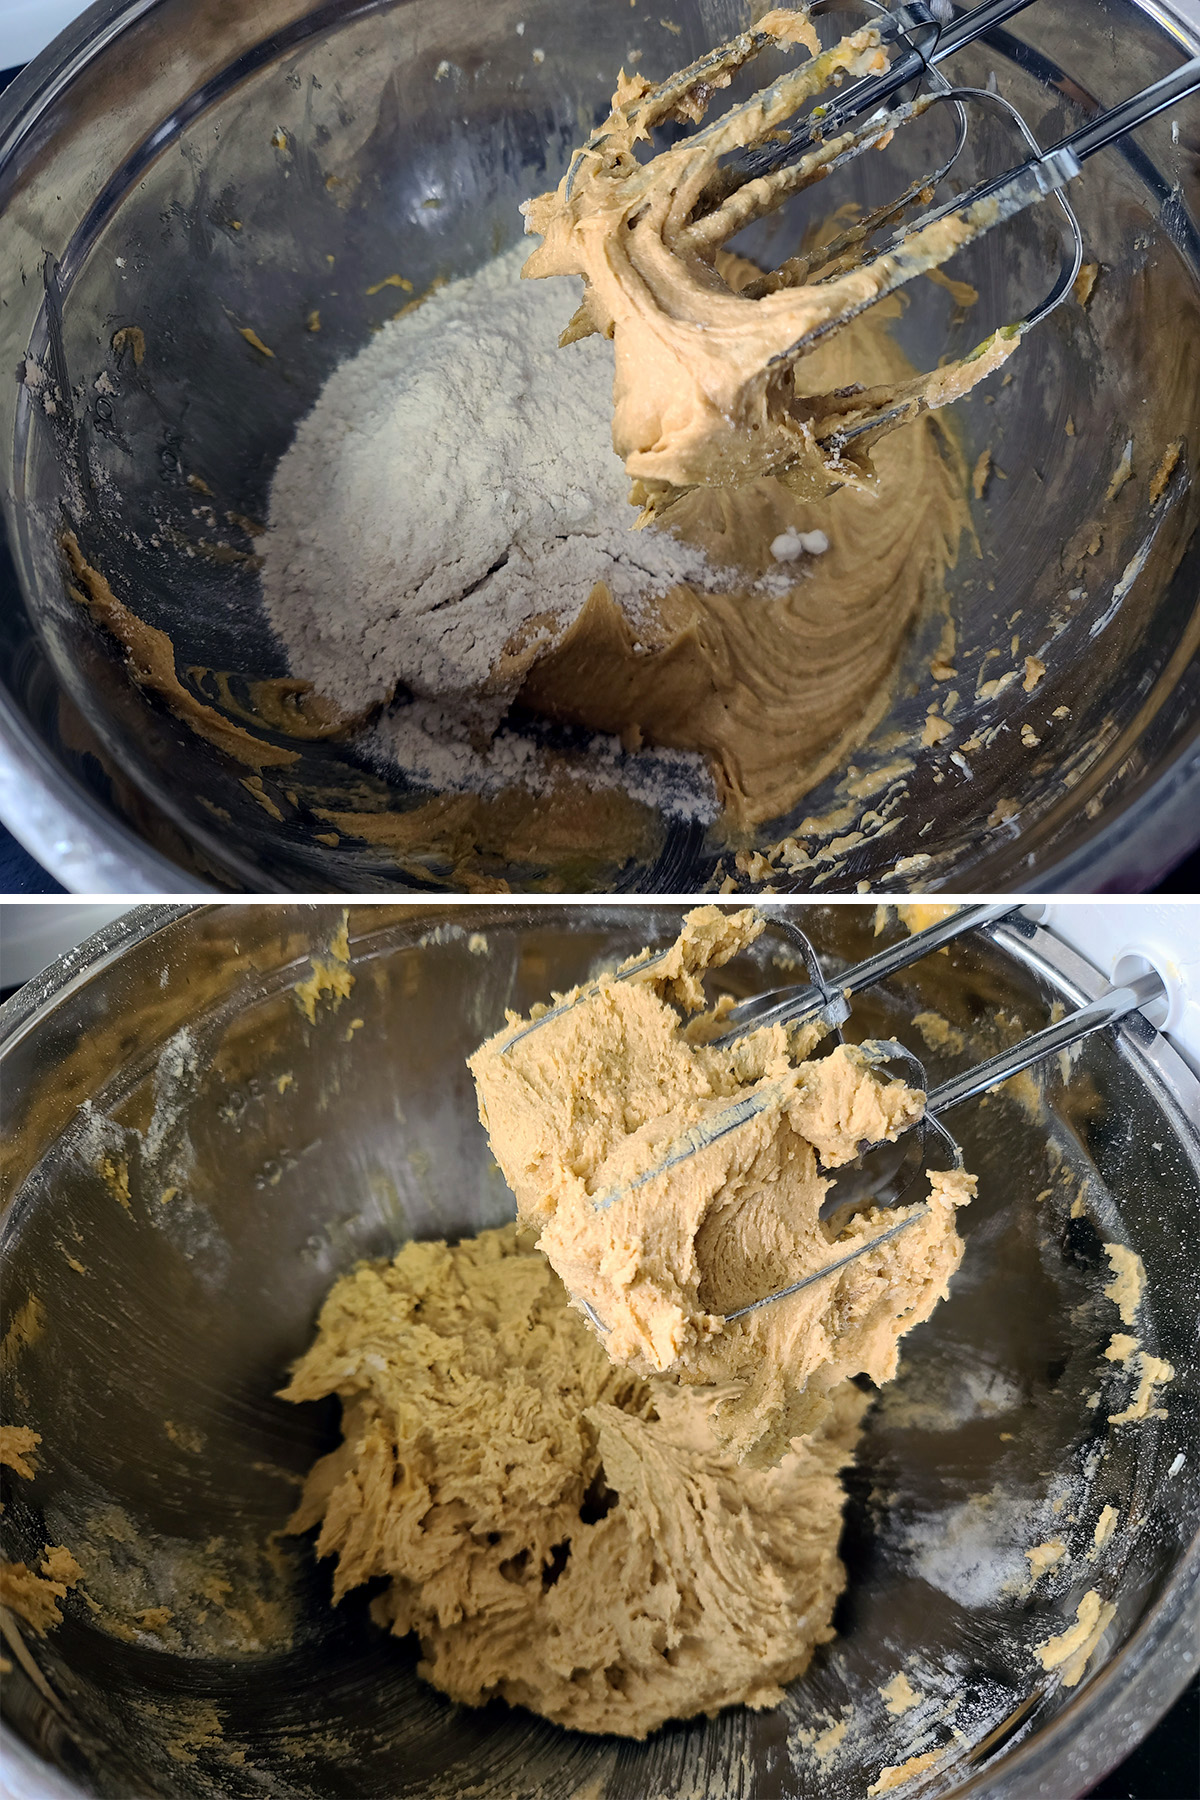 A 2 part image showing the dry ingredients being mixed into the wet ingredients.